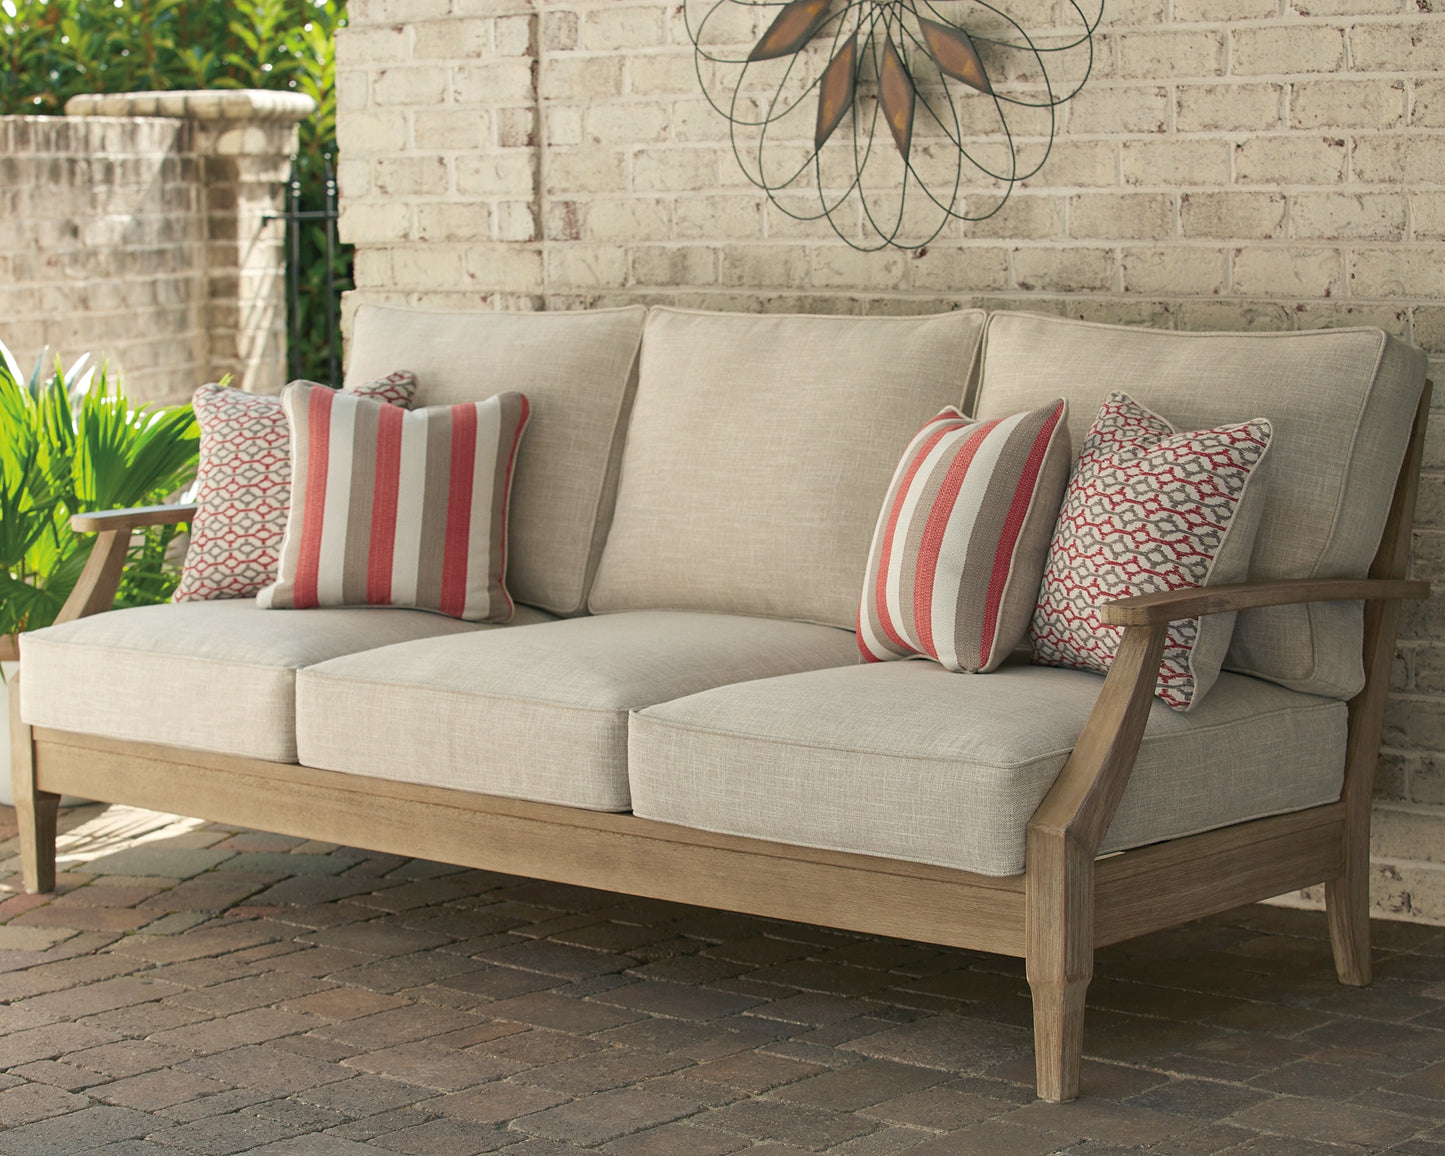 Clare View Outdoor Sofa with Lounge Chair Wilson Furniture (OH)  in Bridgeport, Ohio. Serving Bridgeport, Yorkville, Bellaire, & Avondale